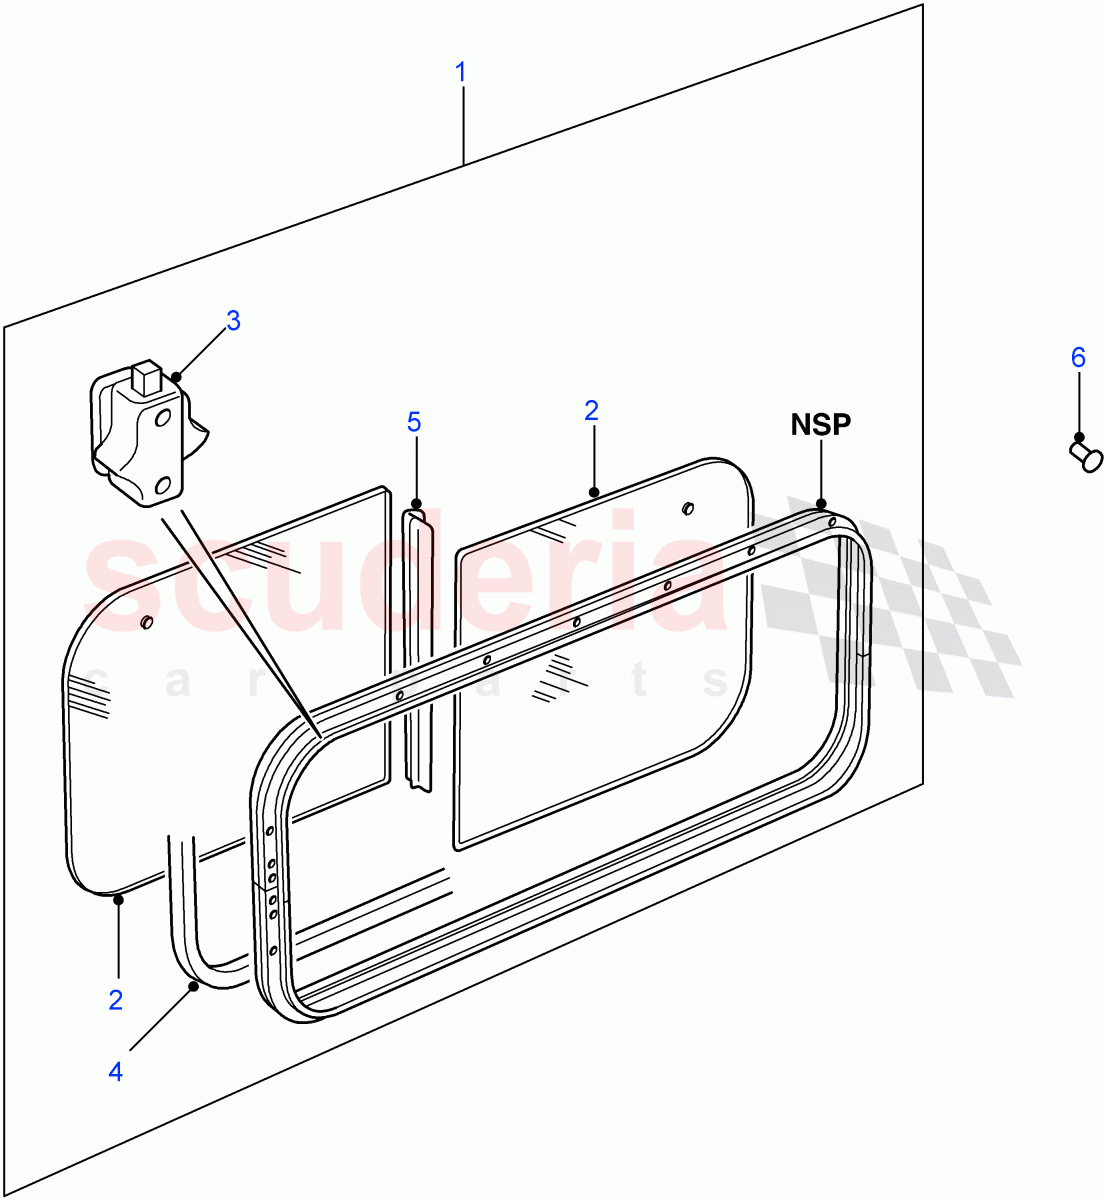 Side Window - Sliding(Hard Top,110" Wheelbase,With Sliding Rear Side Window)((V)FROM7A000001) of Land Rover Land Rover Defender (2007-2016)